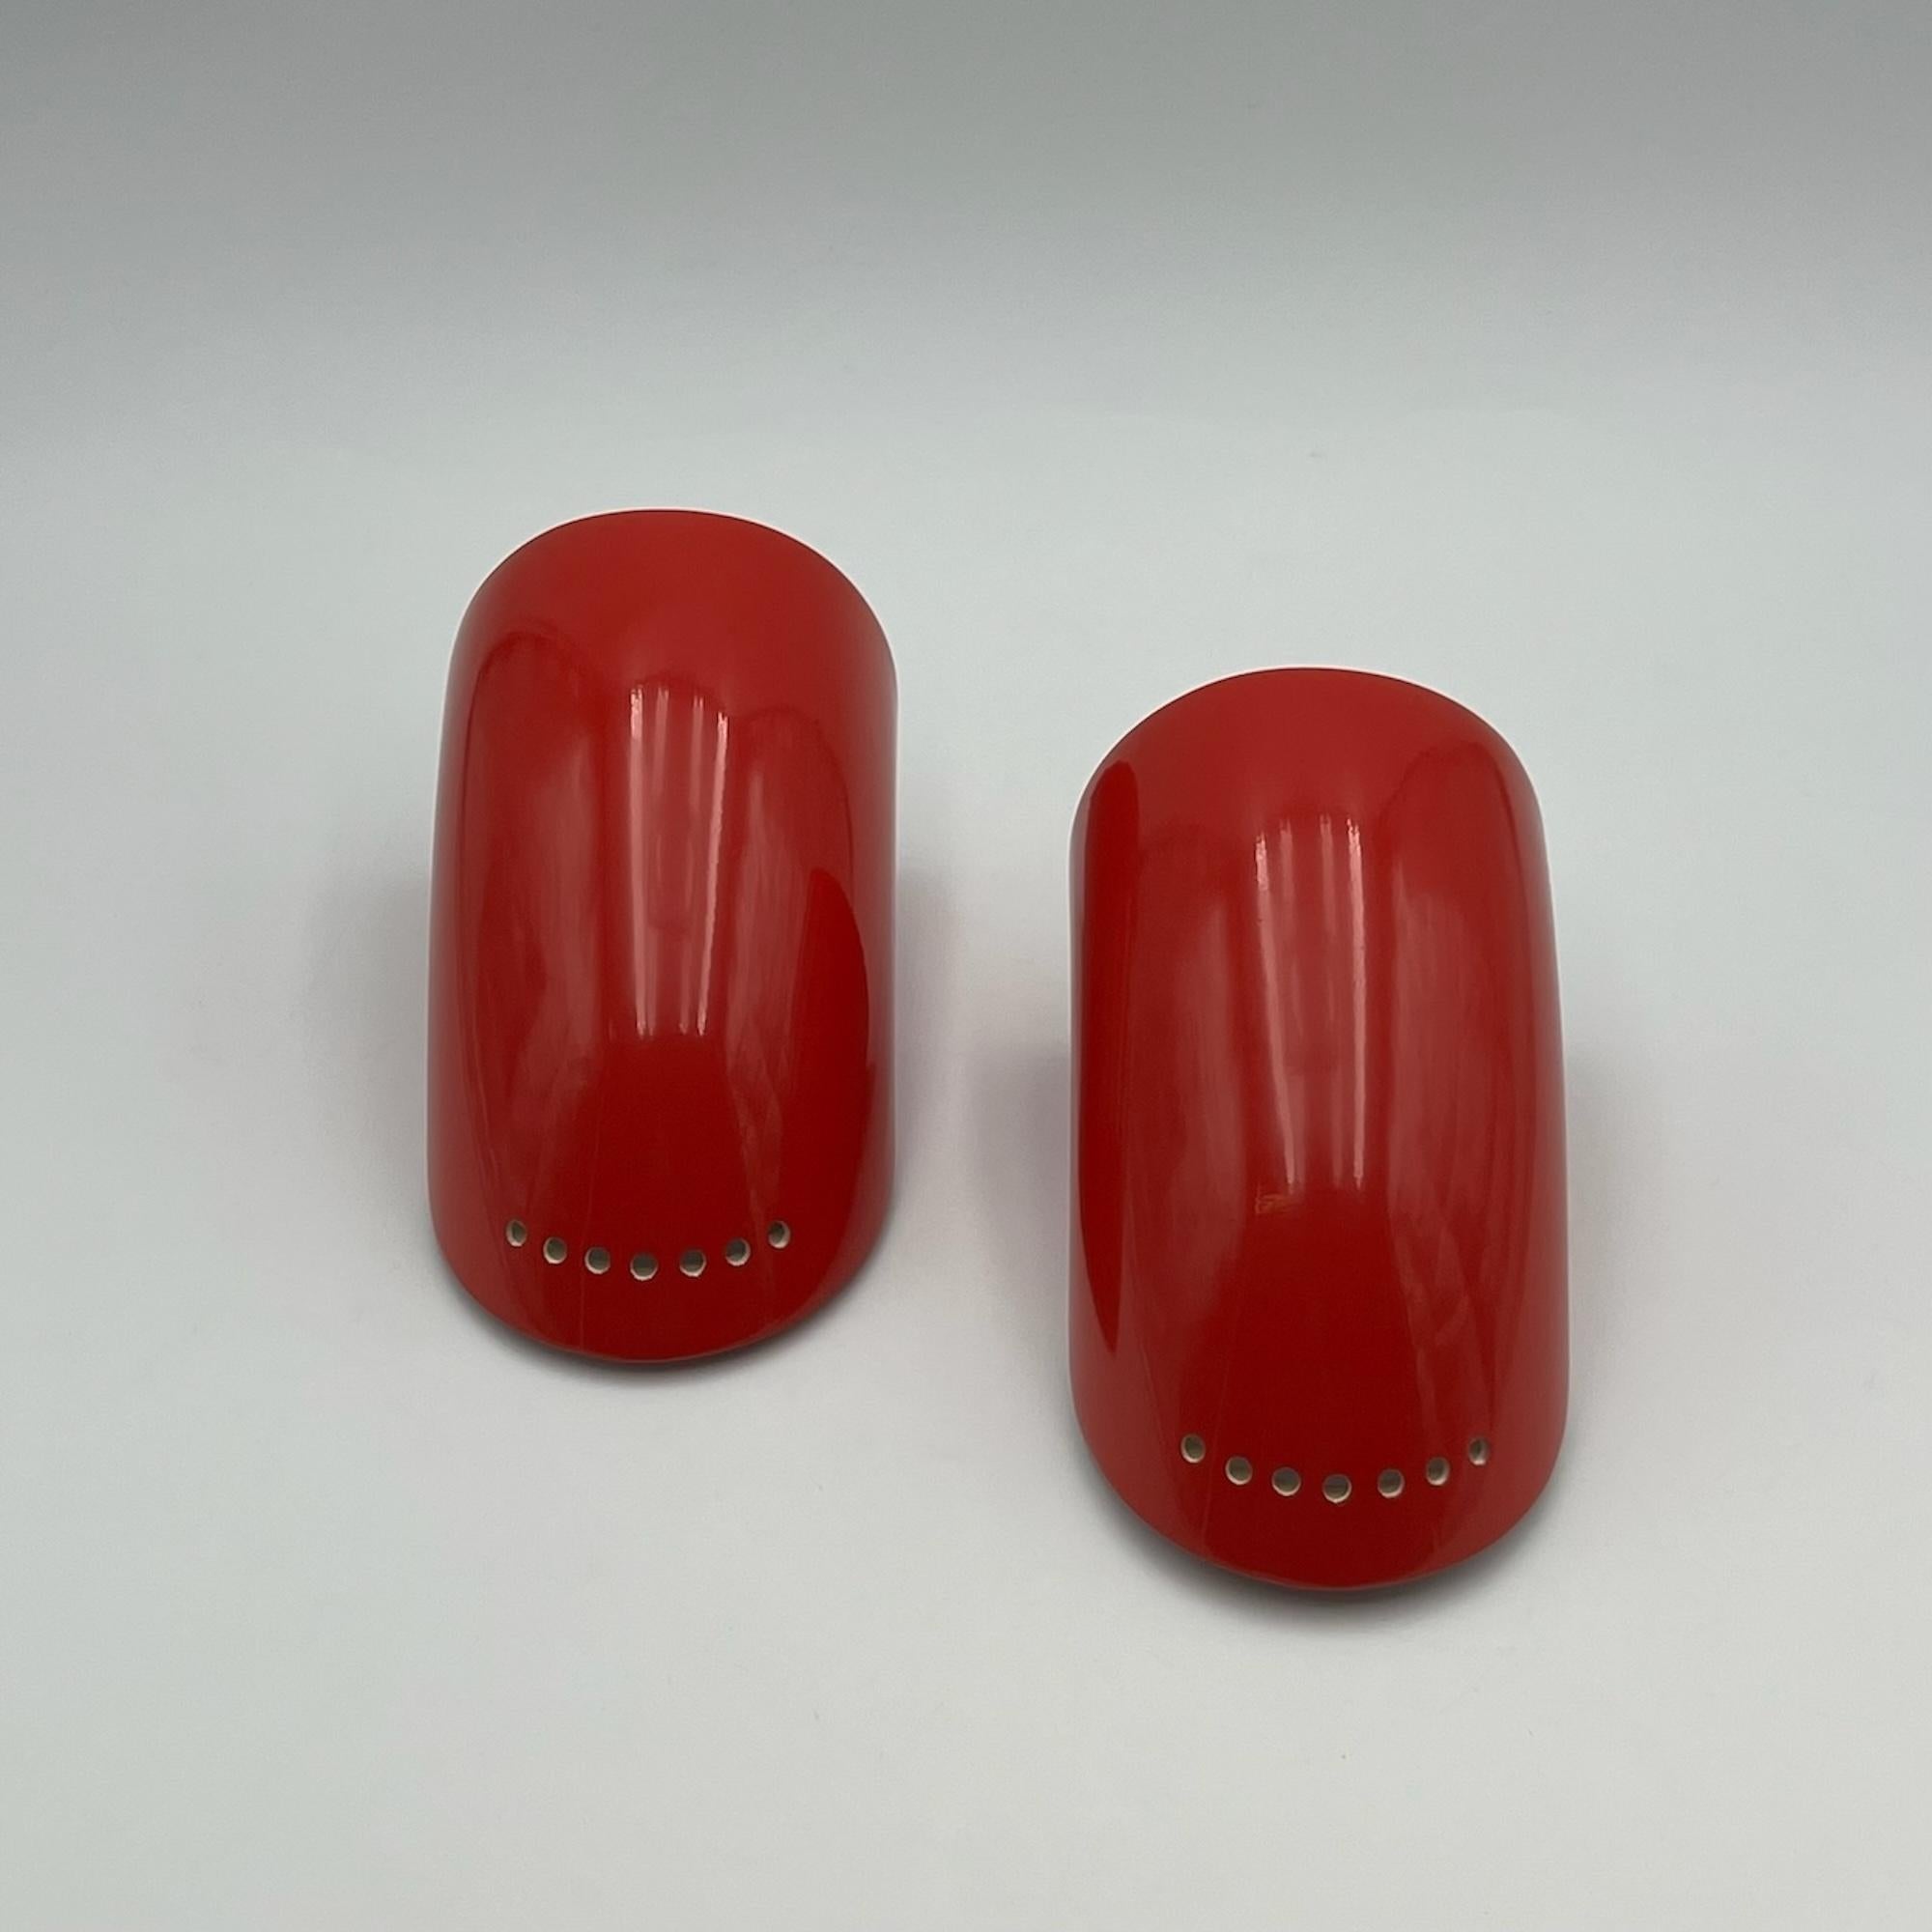 Gomito Wall Lamps by Elio Martinelli for Martinelli Luce in Red, 1970s, Set of 2 In Good Condition For Sale In San Benedetto Del Tronto, IT